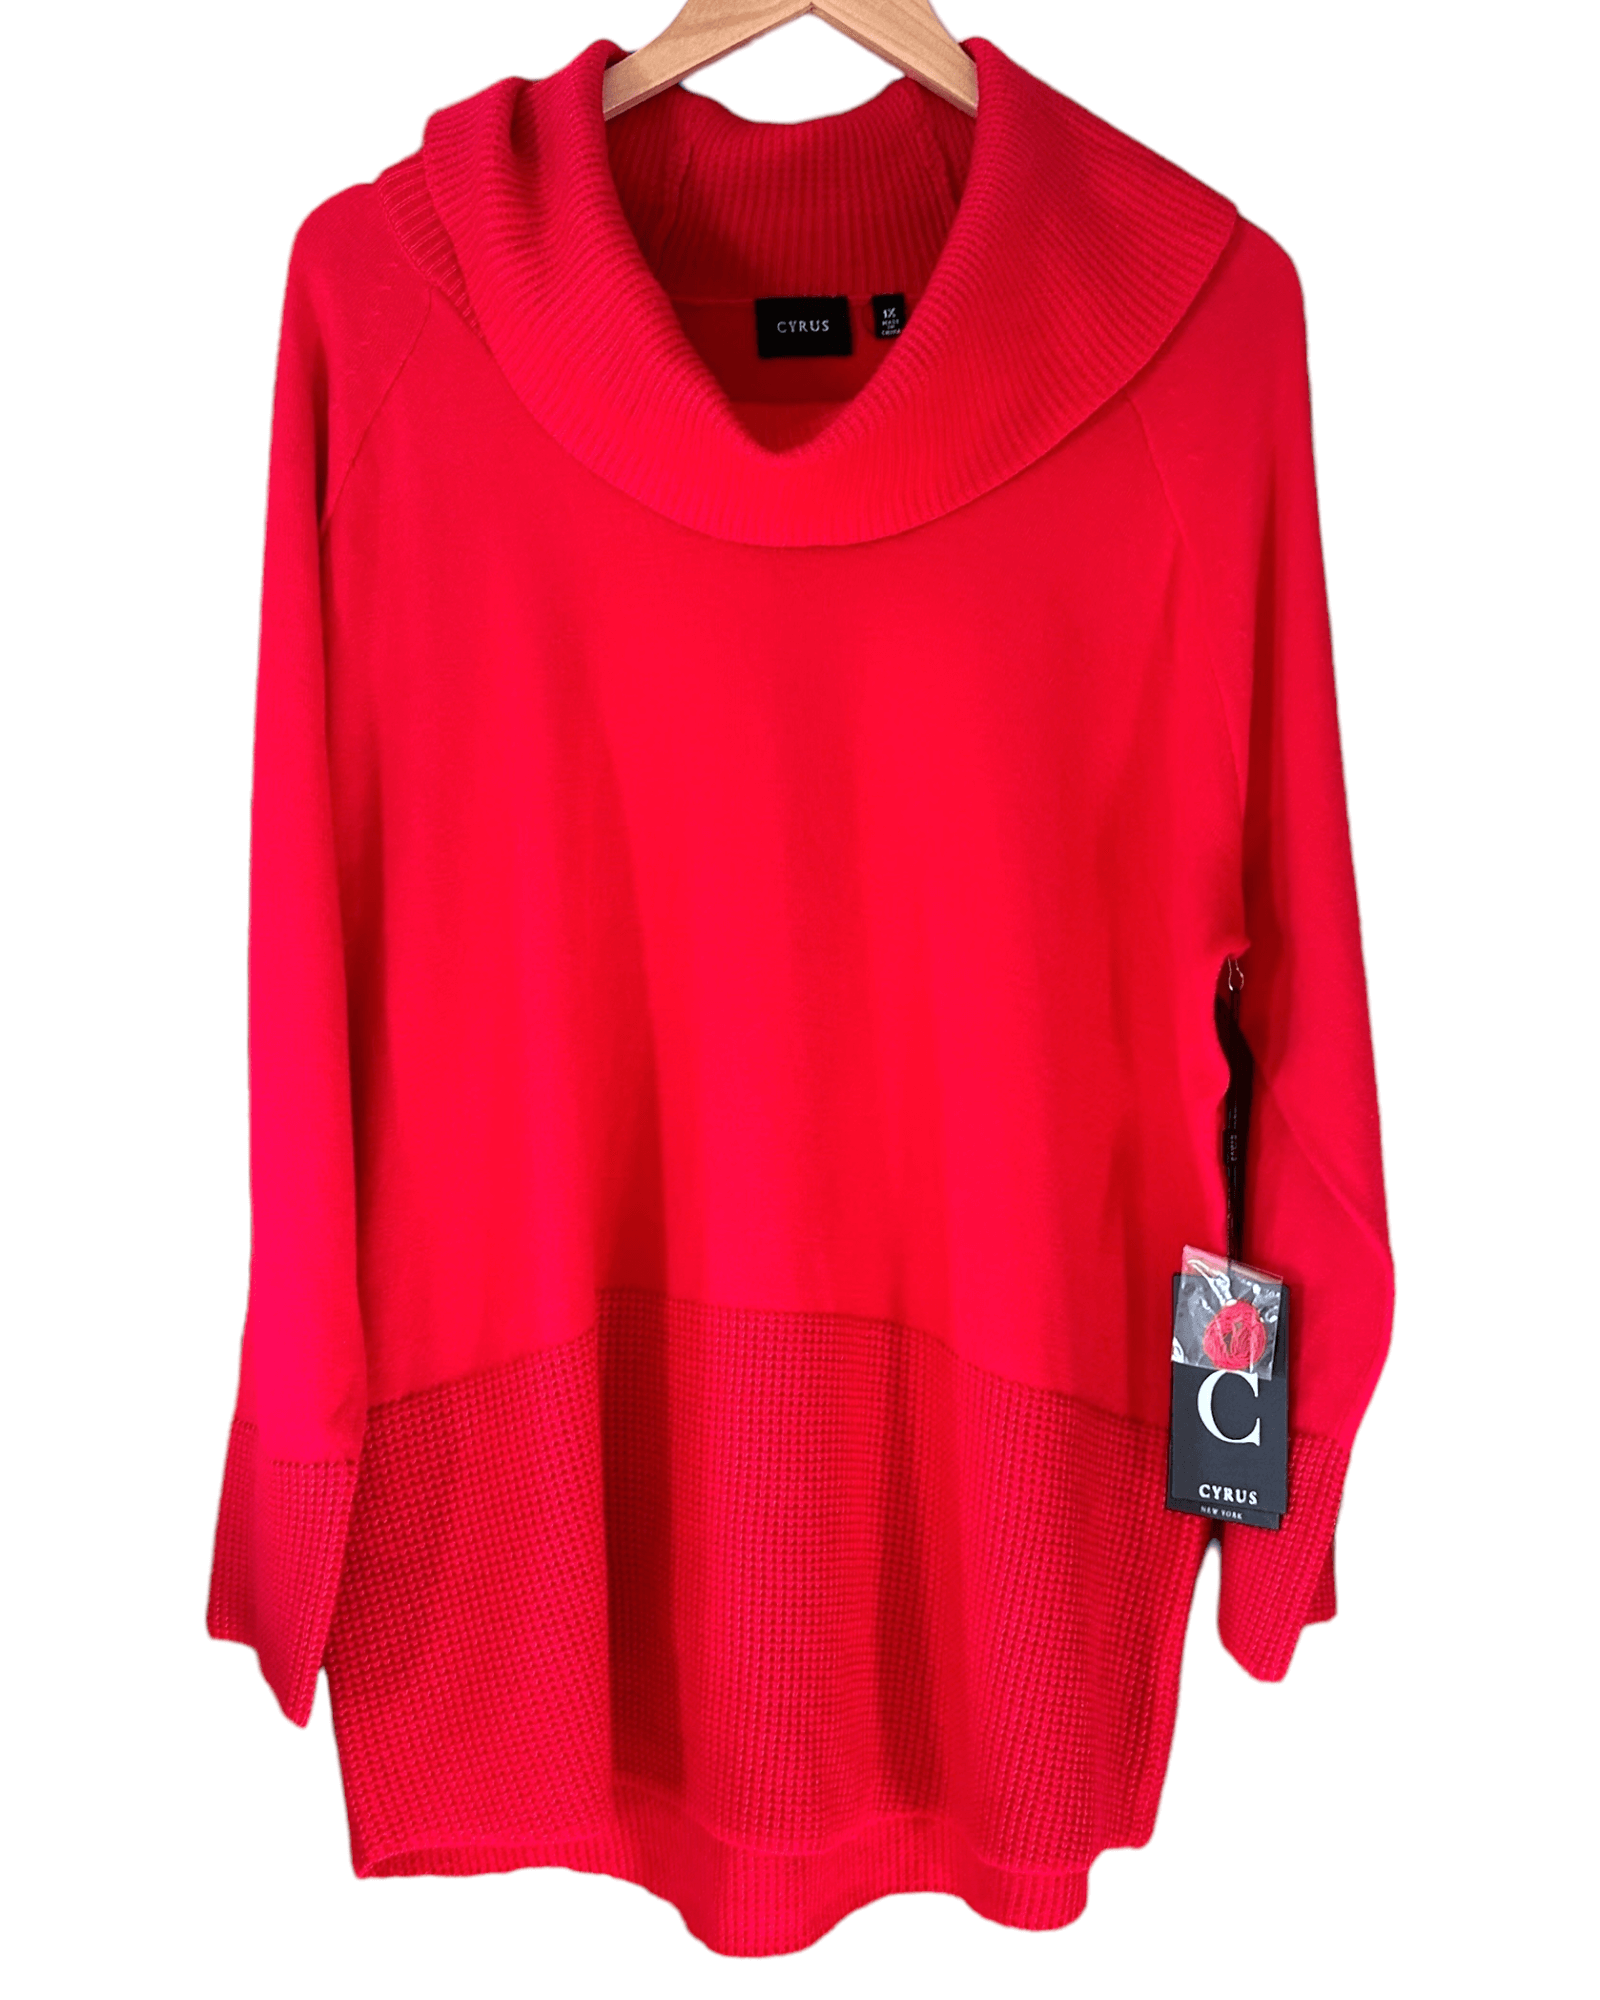 Cool Winter CYRUS cherry red cowl neck tunic sweater